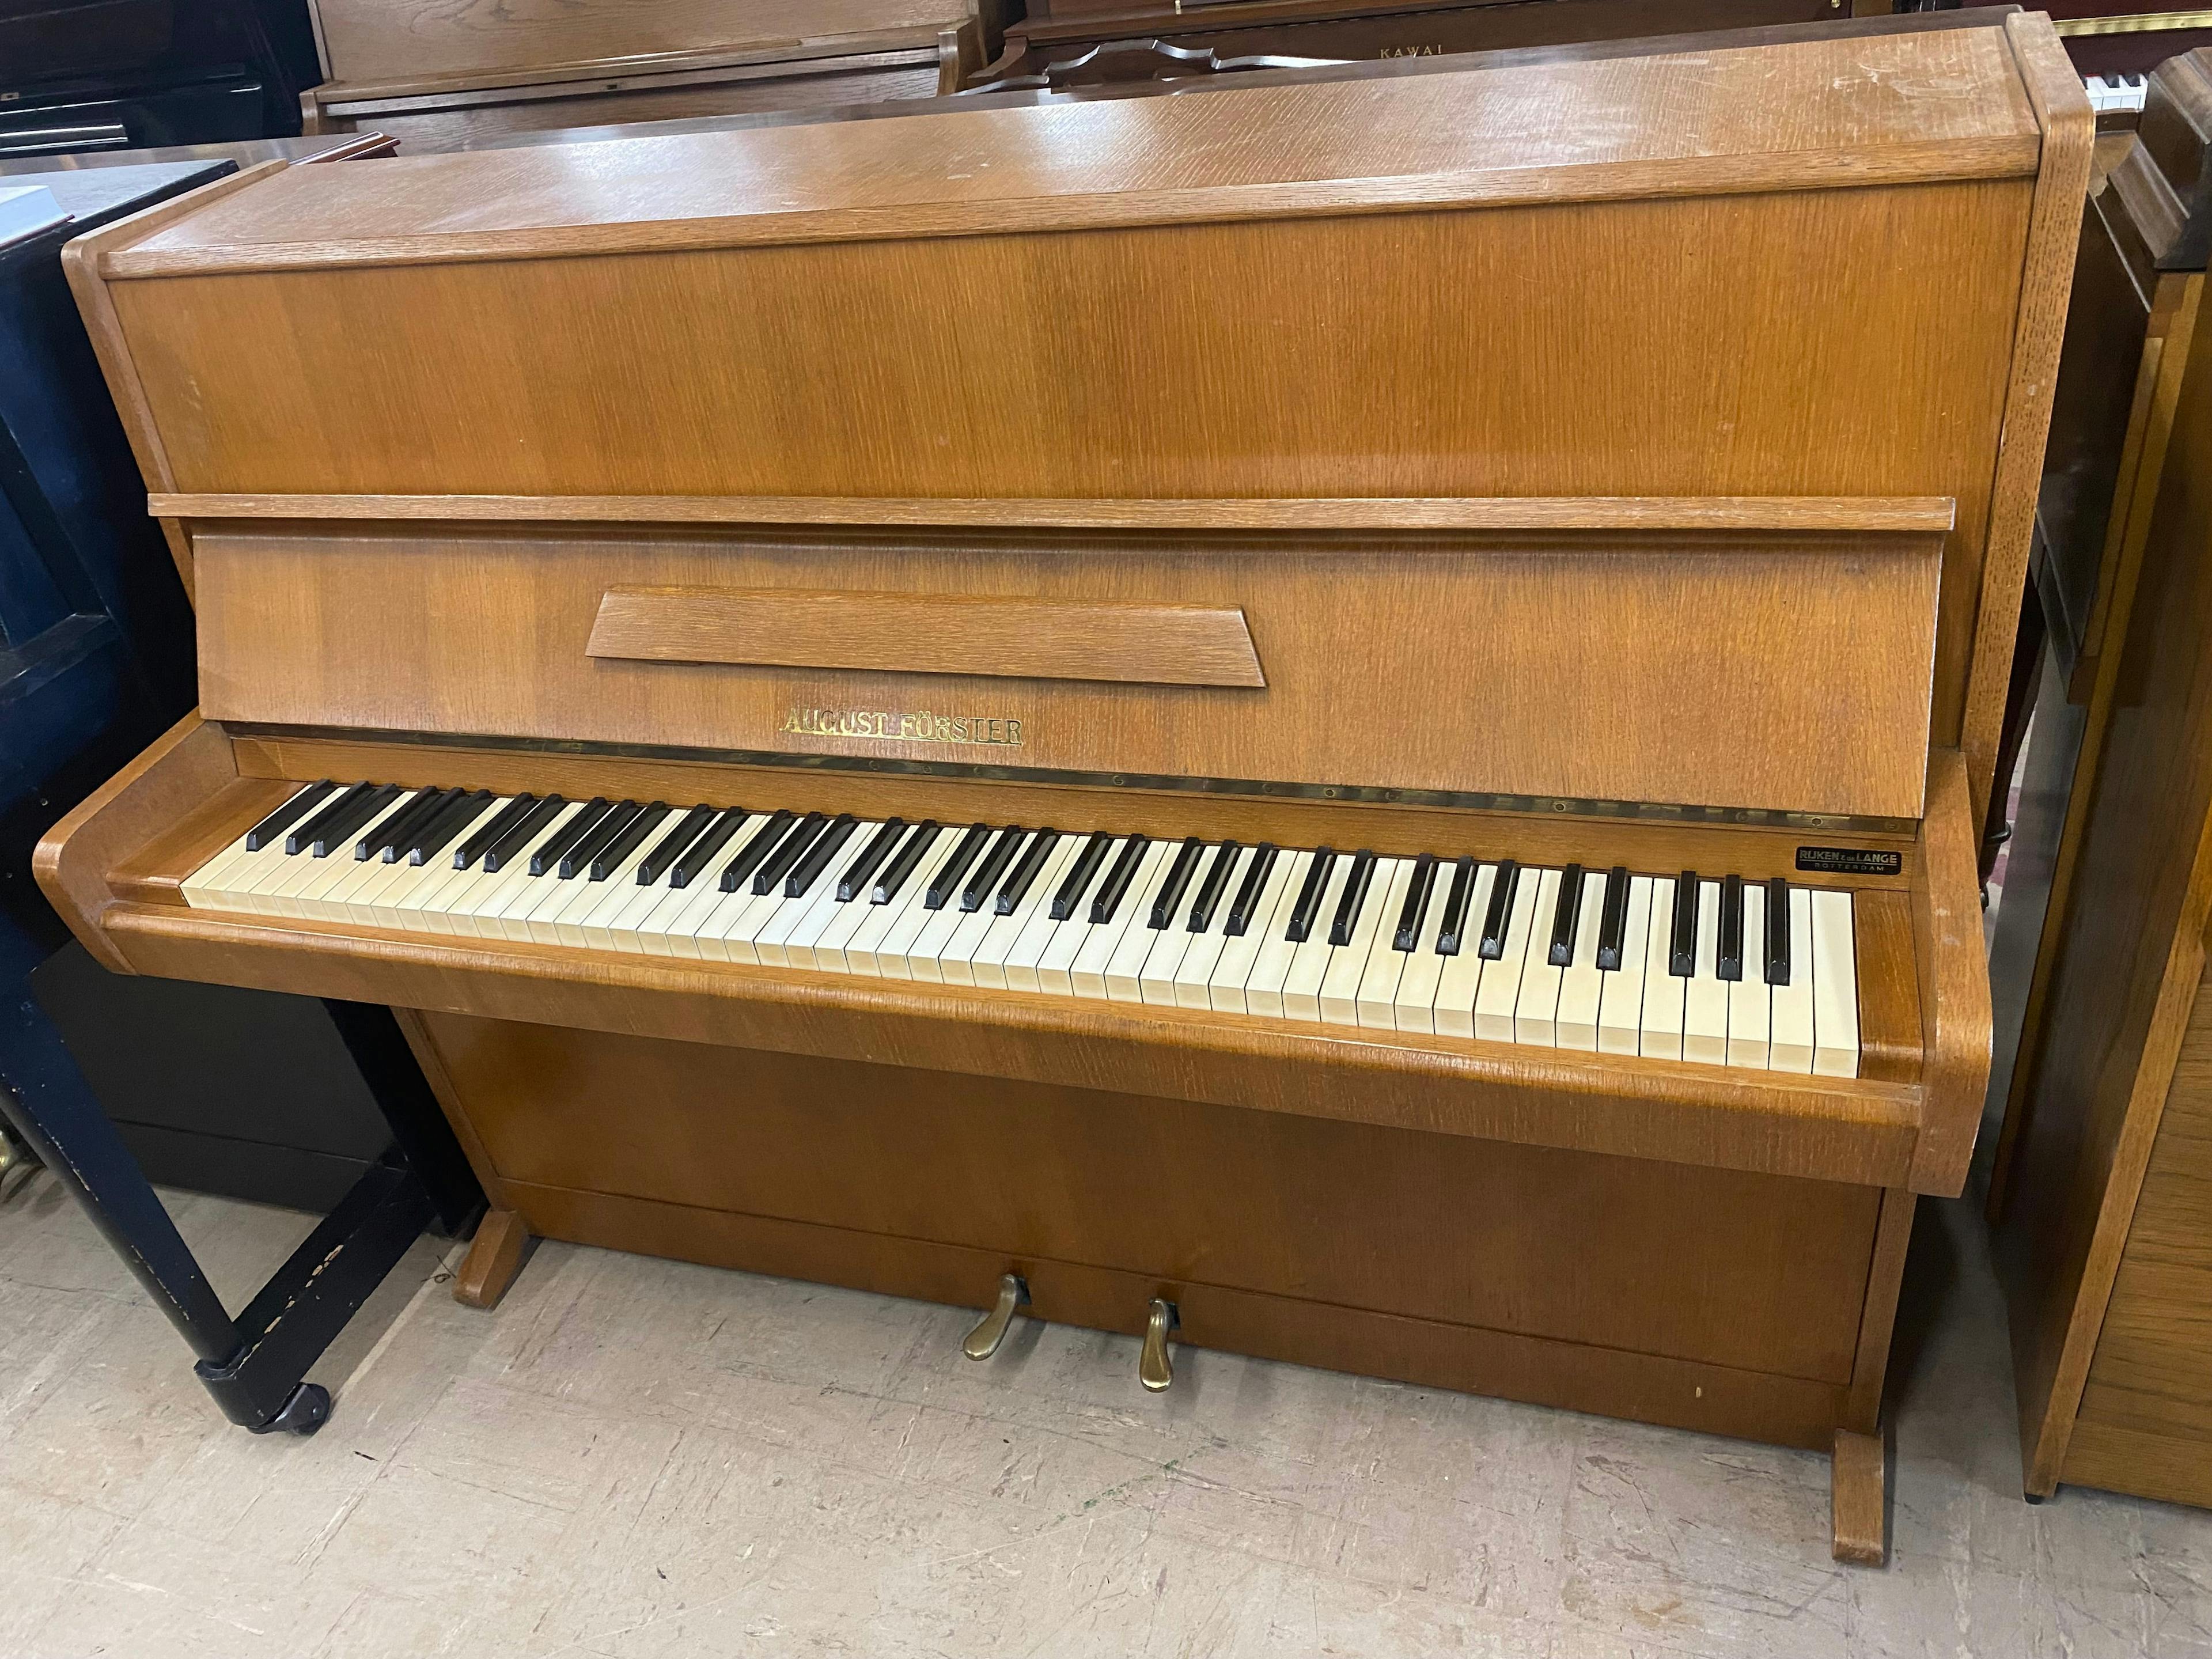 August Forster Studio Upright Piano